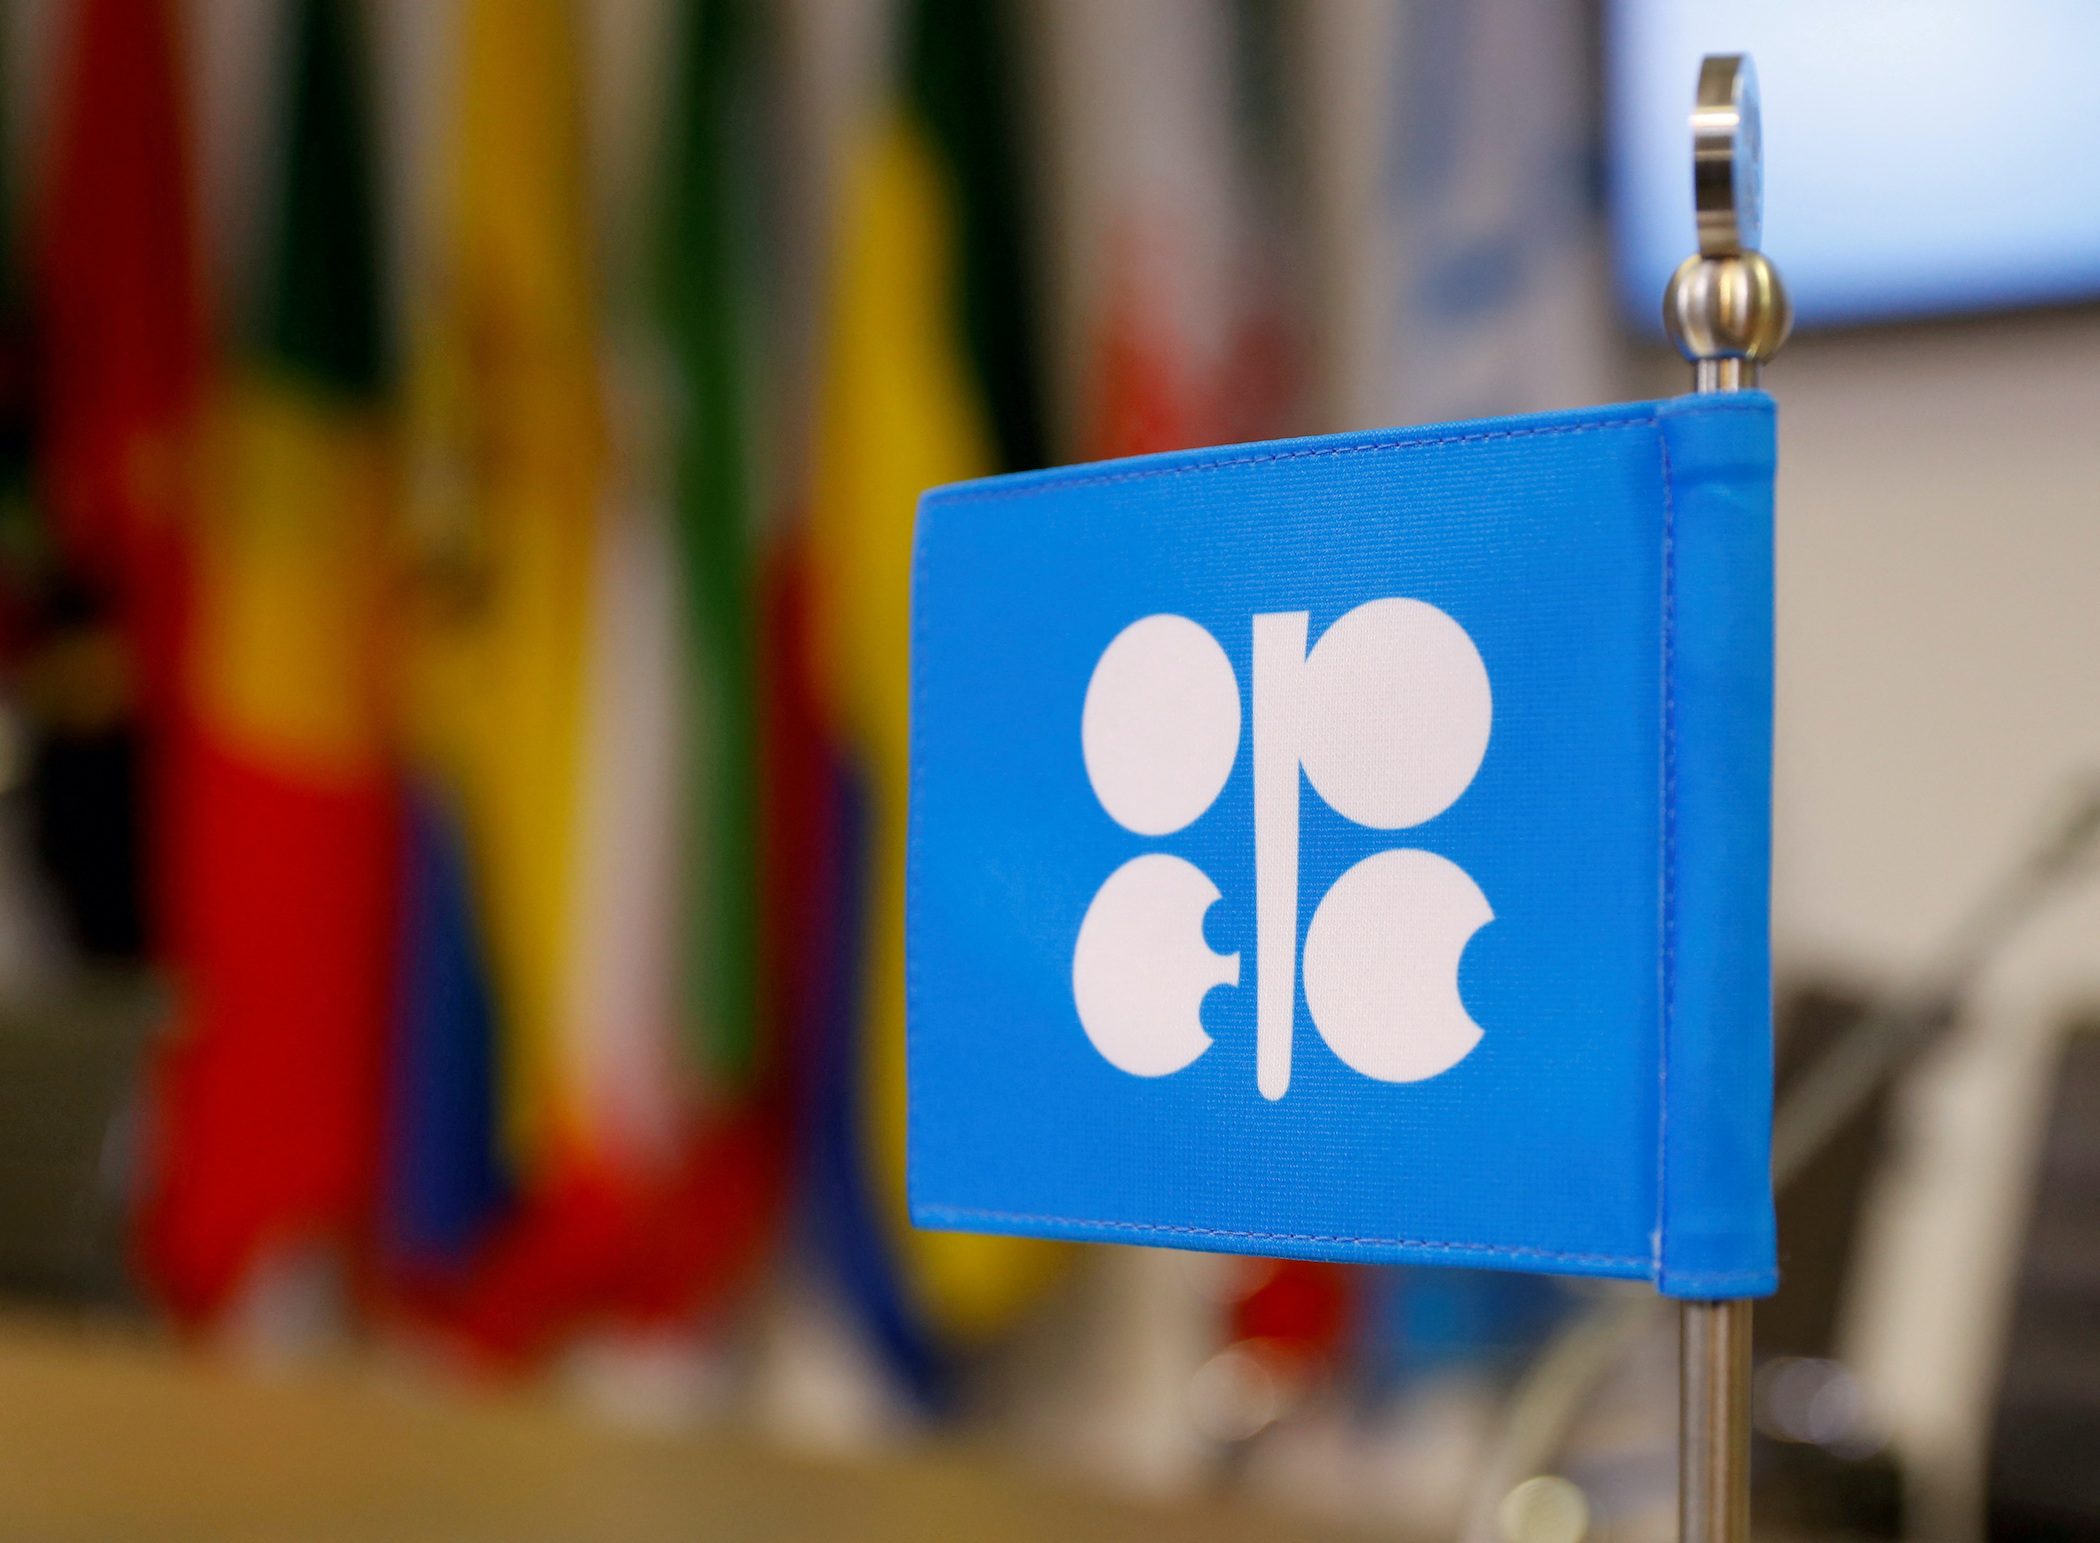 Saudi denies oil output hike discussion, says OPEC+ may cut if needed